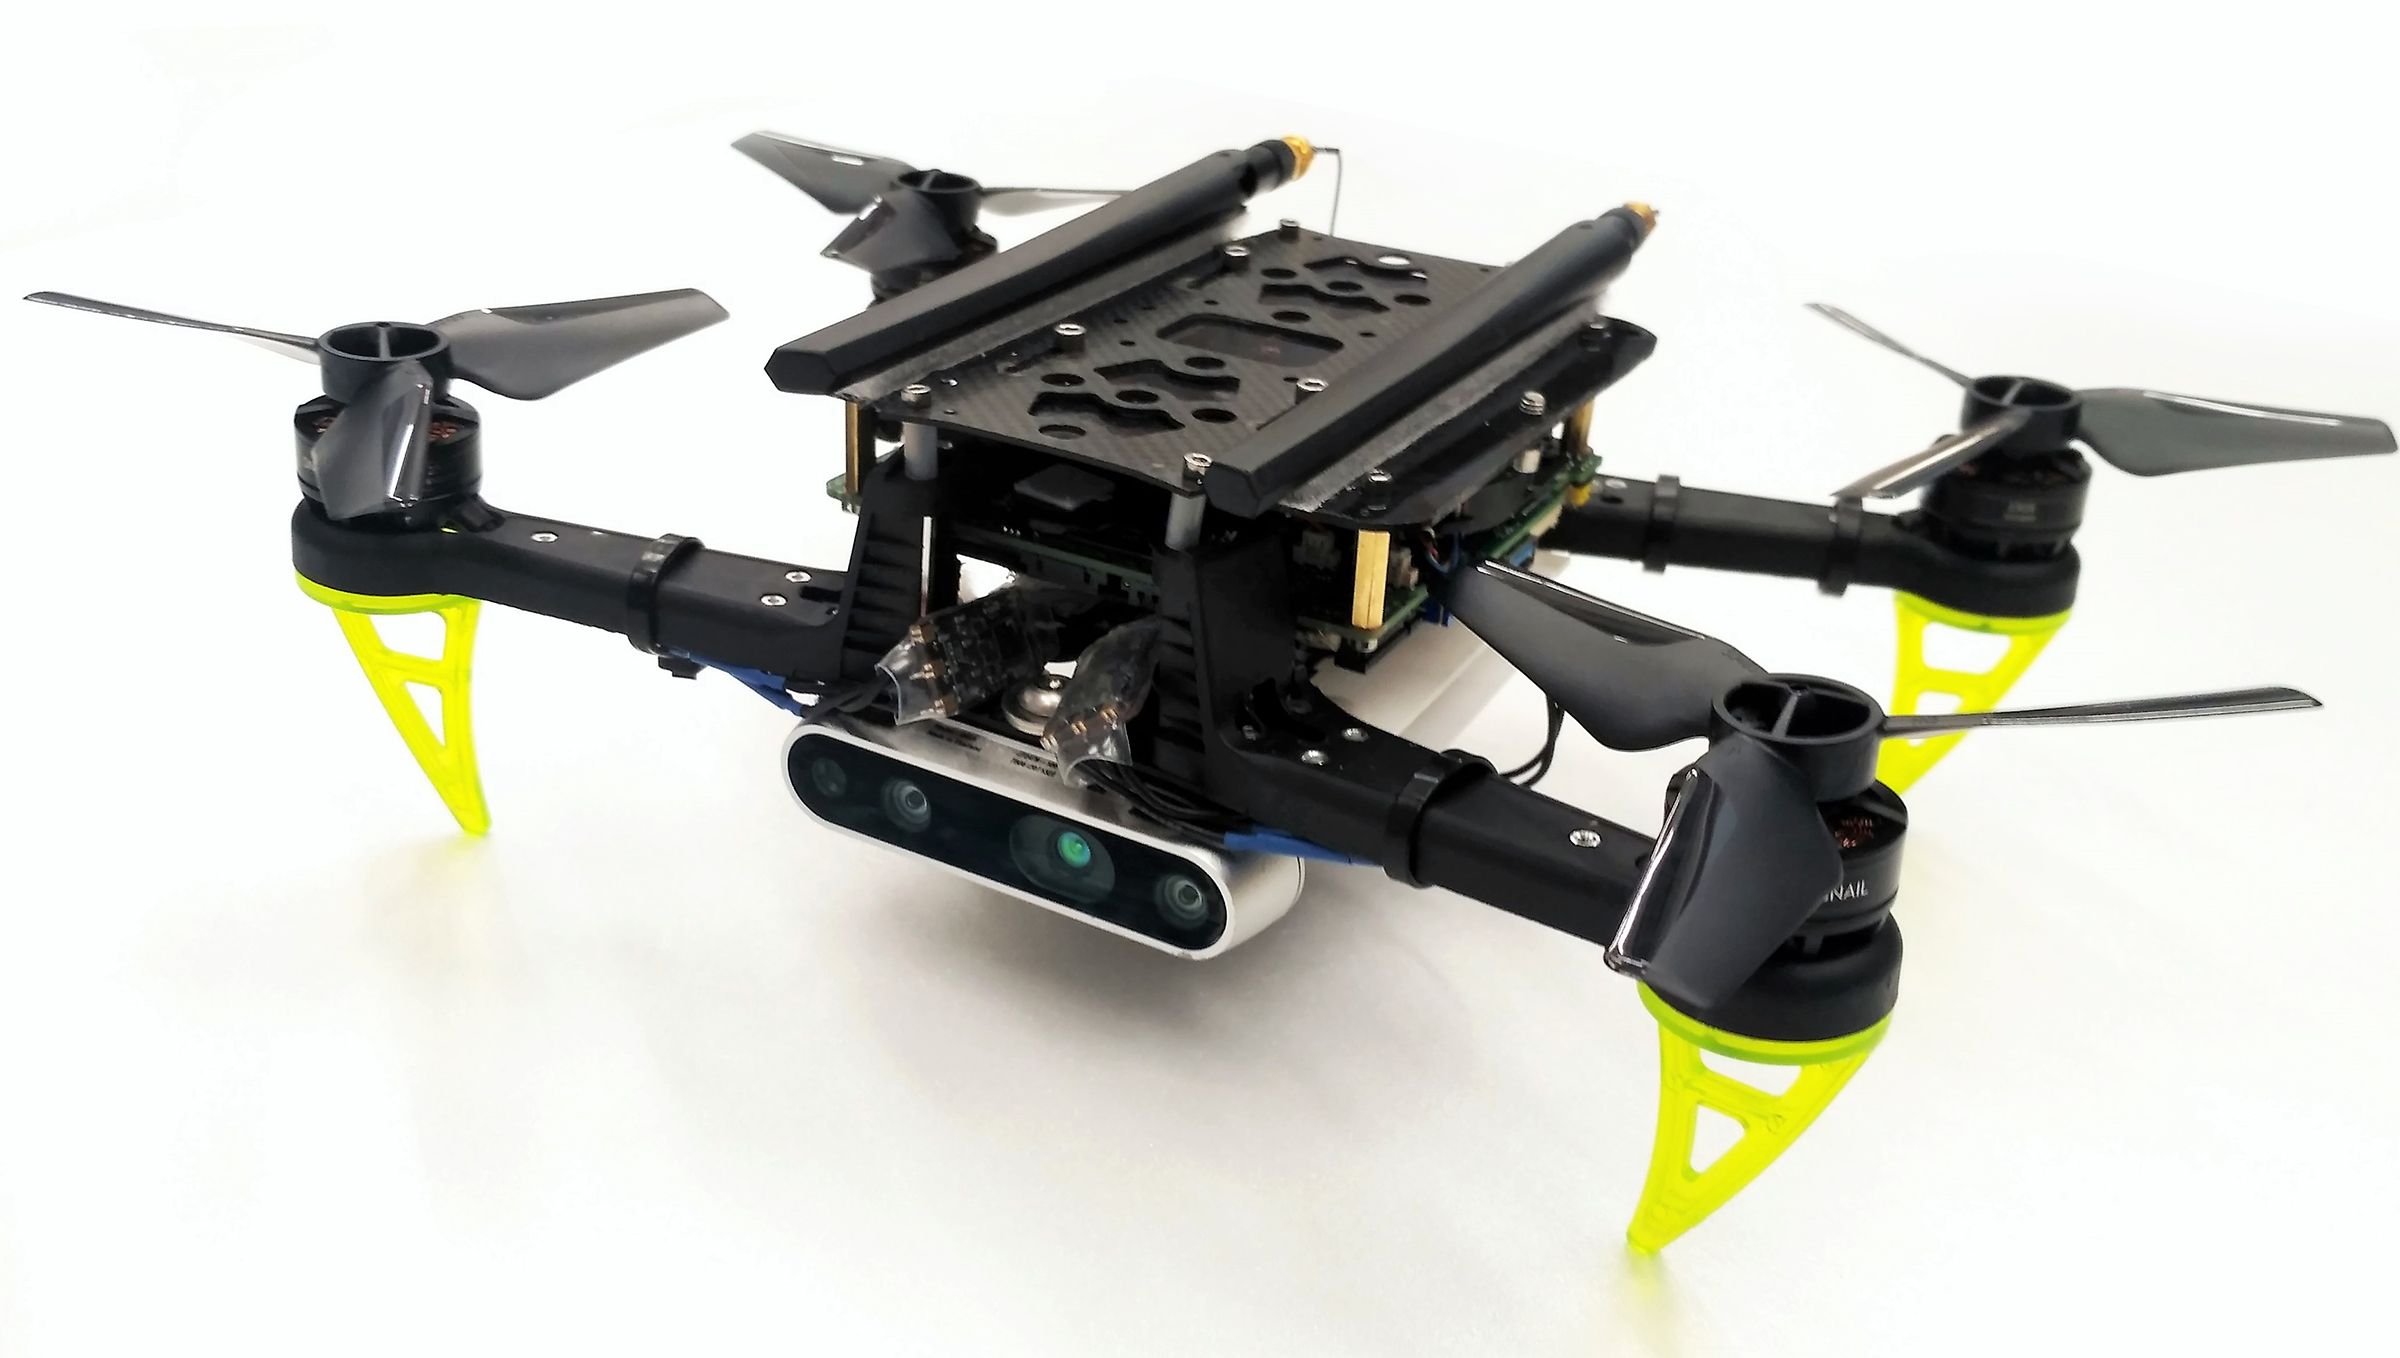 Stanford's micro-drones can grab and haul heavy loads, open doors